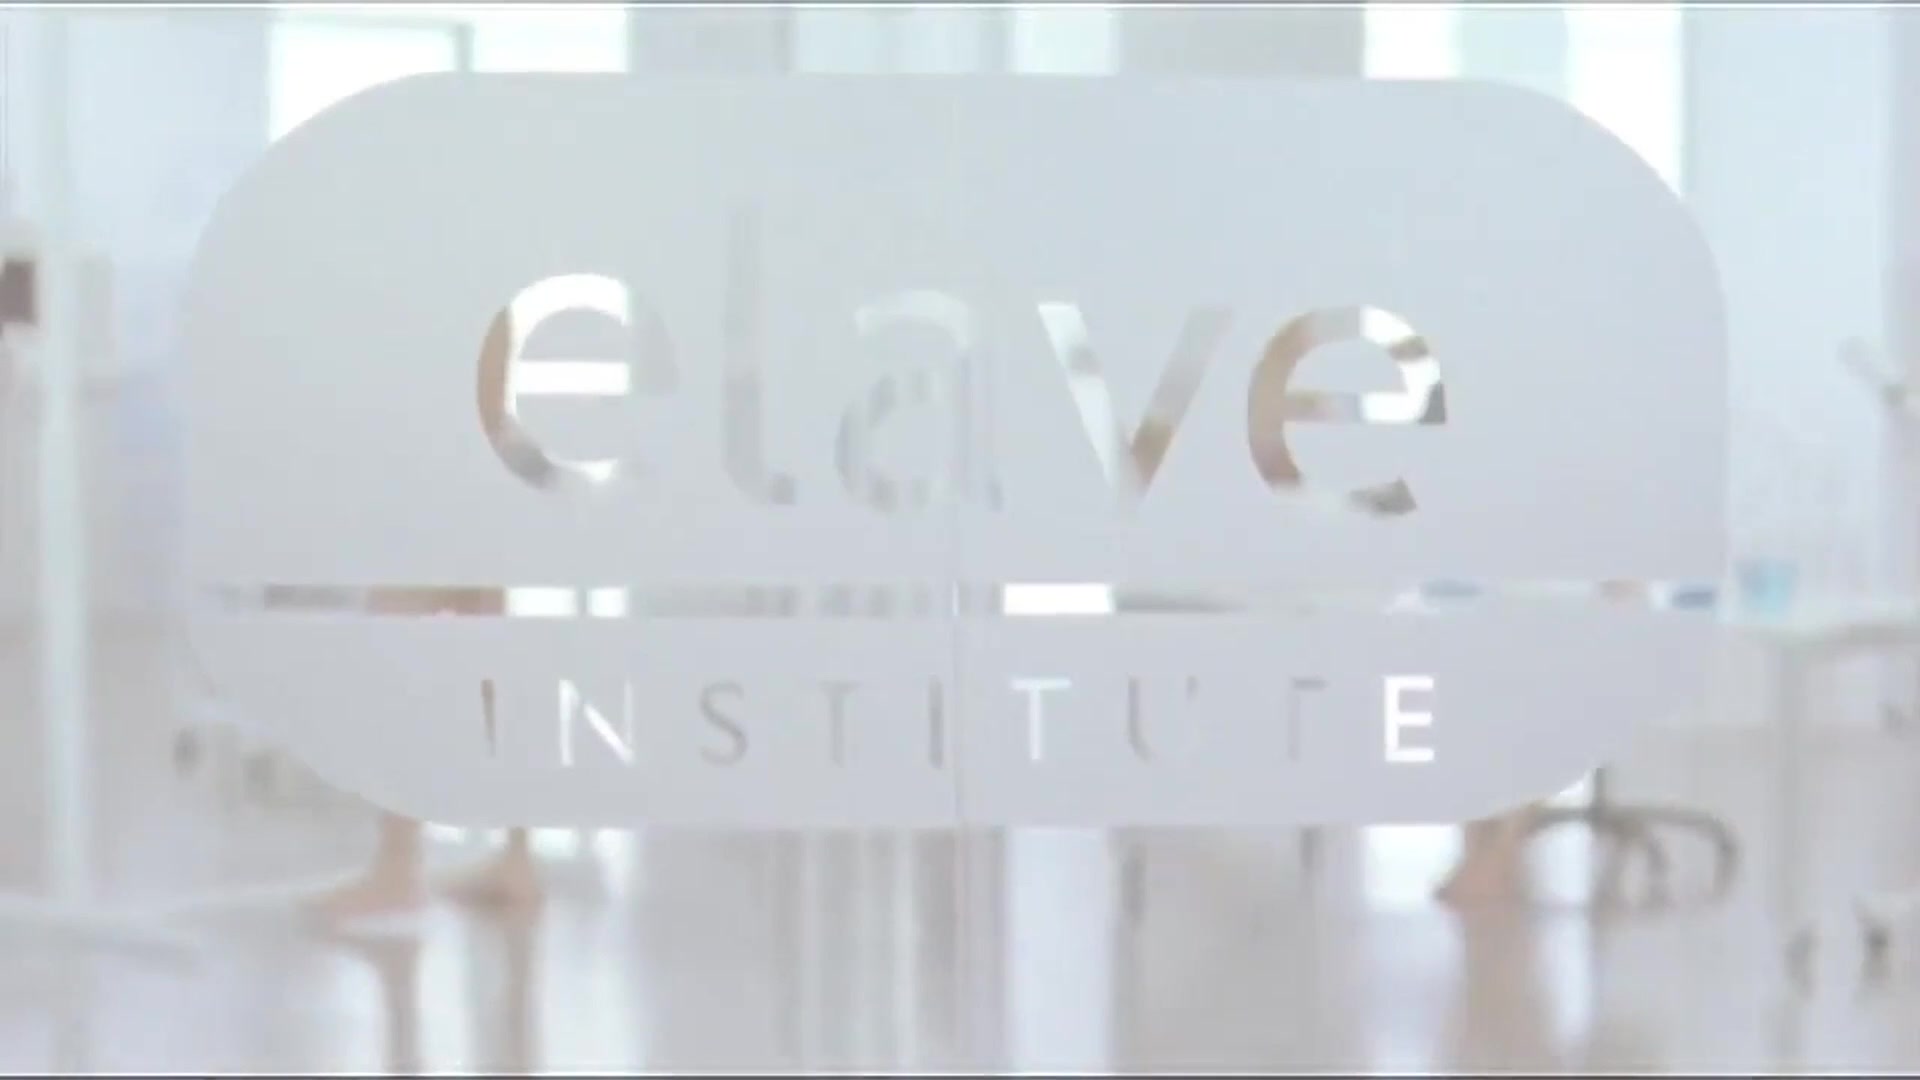 Tyler-Jane Mitchel in the "Elave - Nothing to Hide" Skin Care product commercial